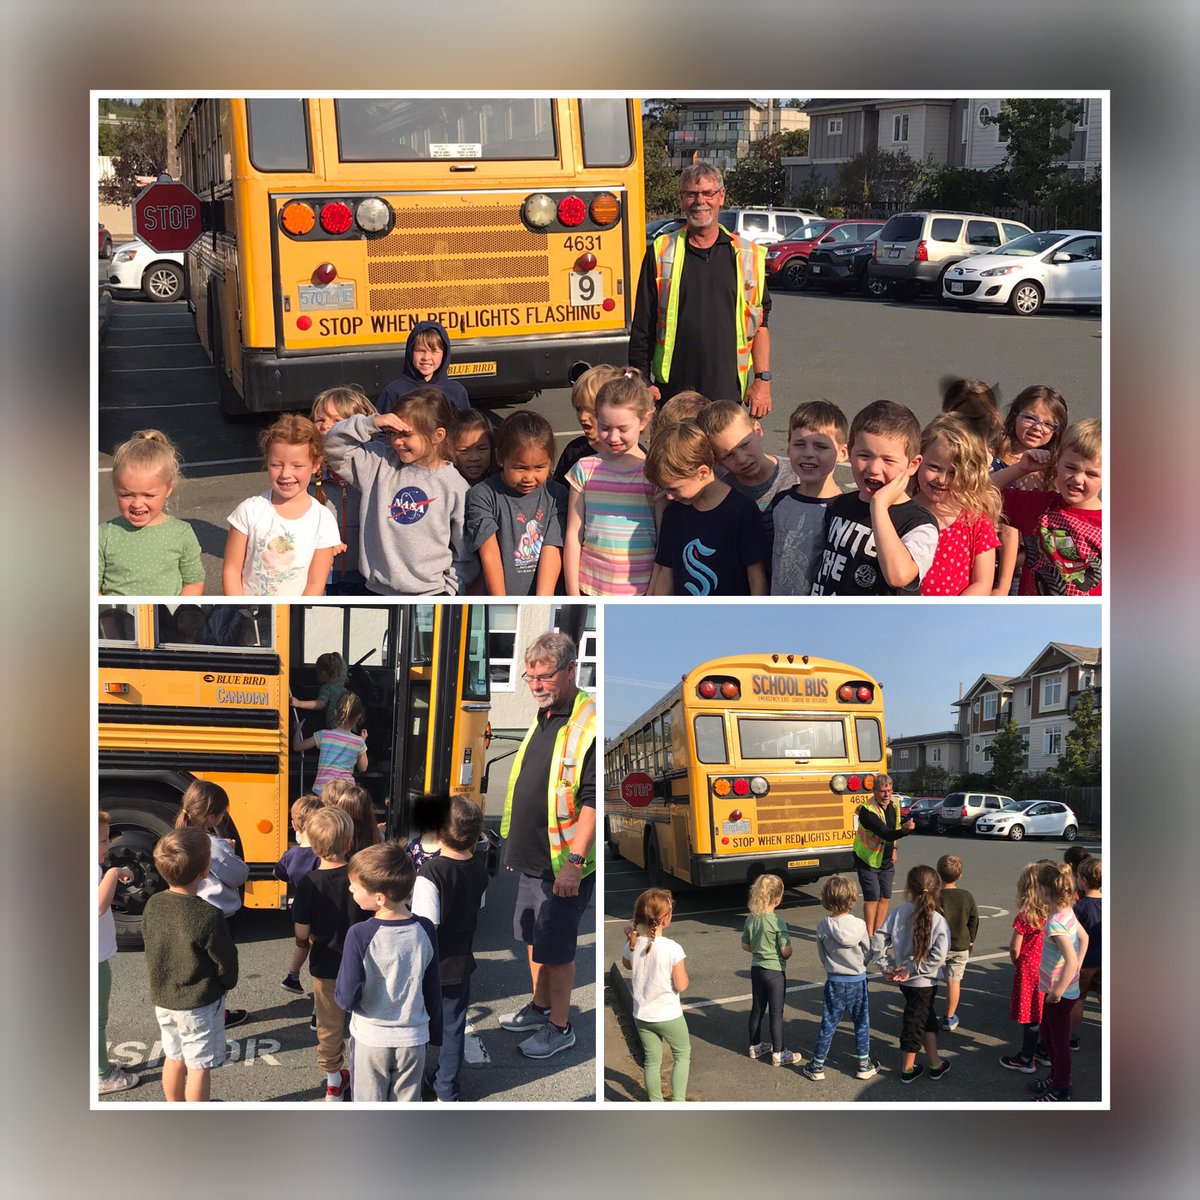 Kindergarten students had a great time exploring and learning how to be safe on and around school buses! Thank you Mr. B & Mr. C @sd63schools for being so fantastic! It was so much fun! #bussafety #lifeinkindergarten